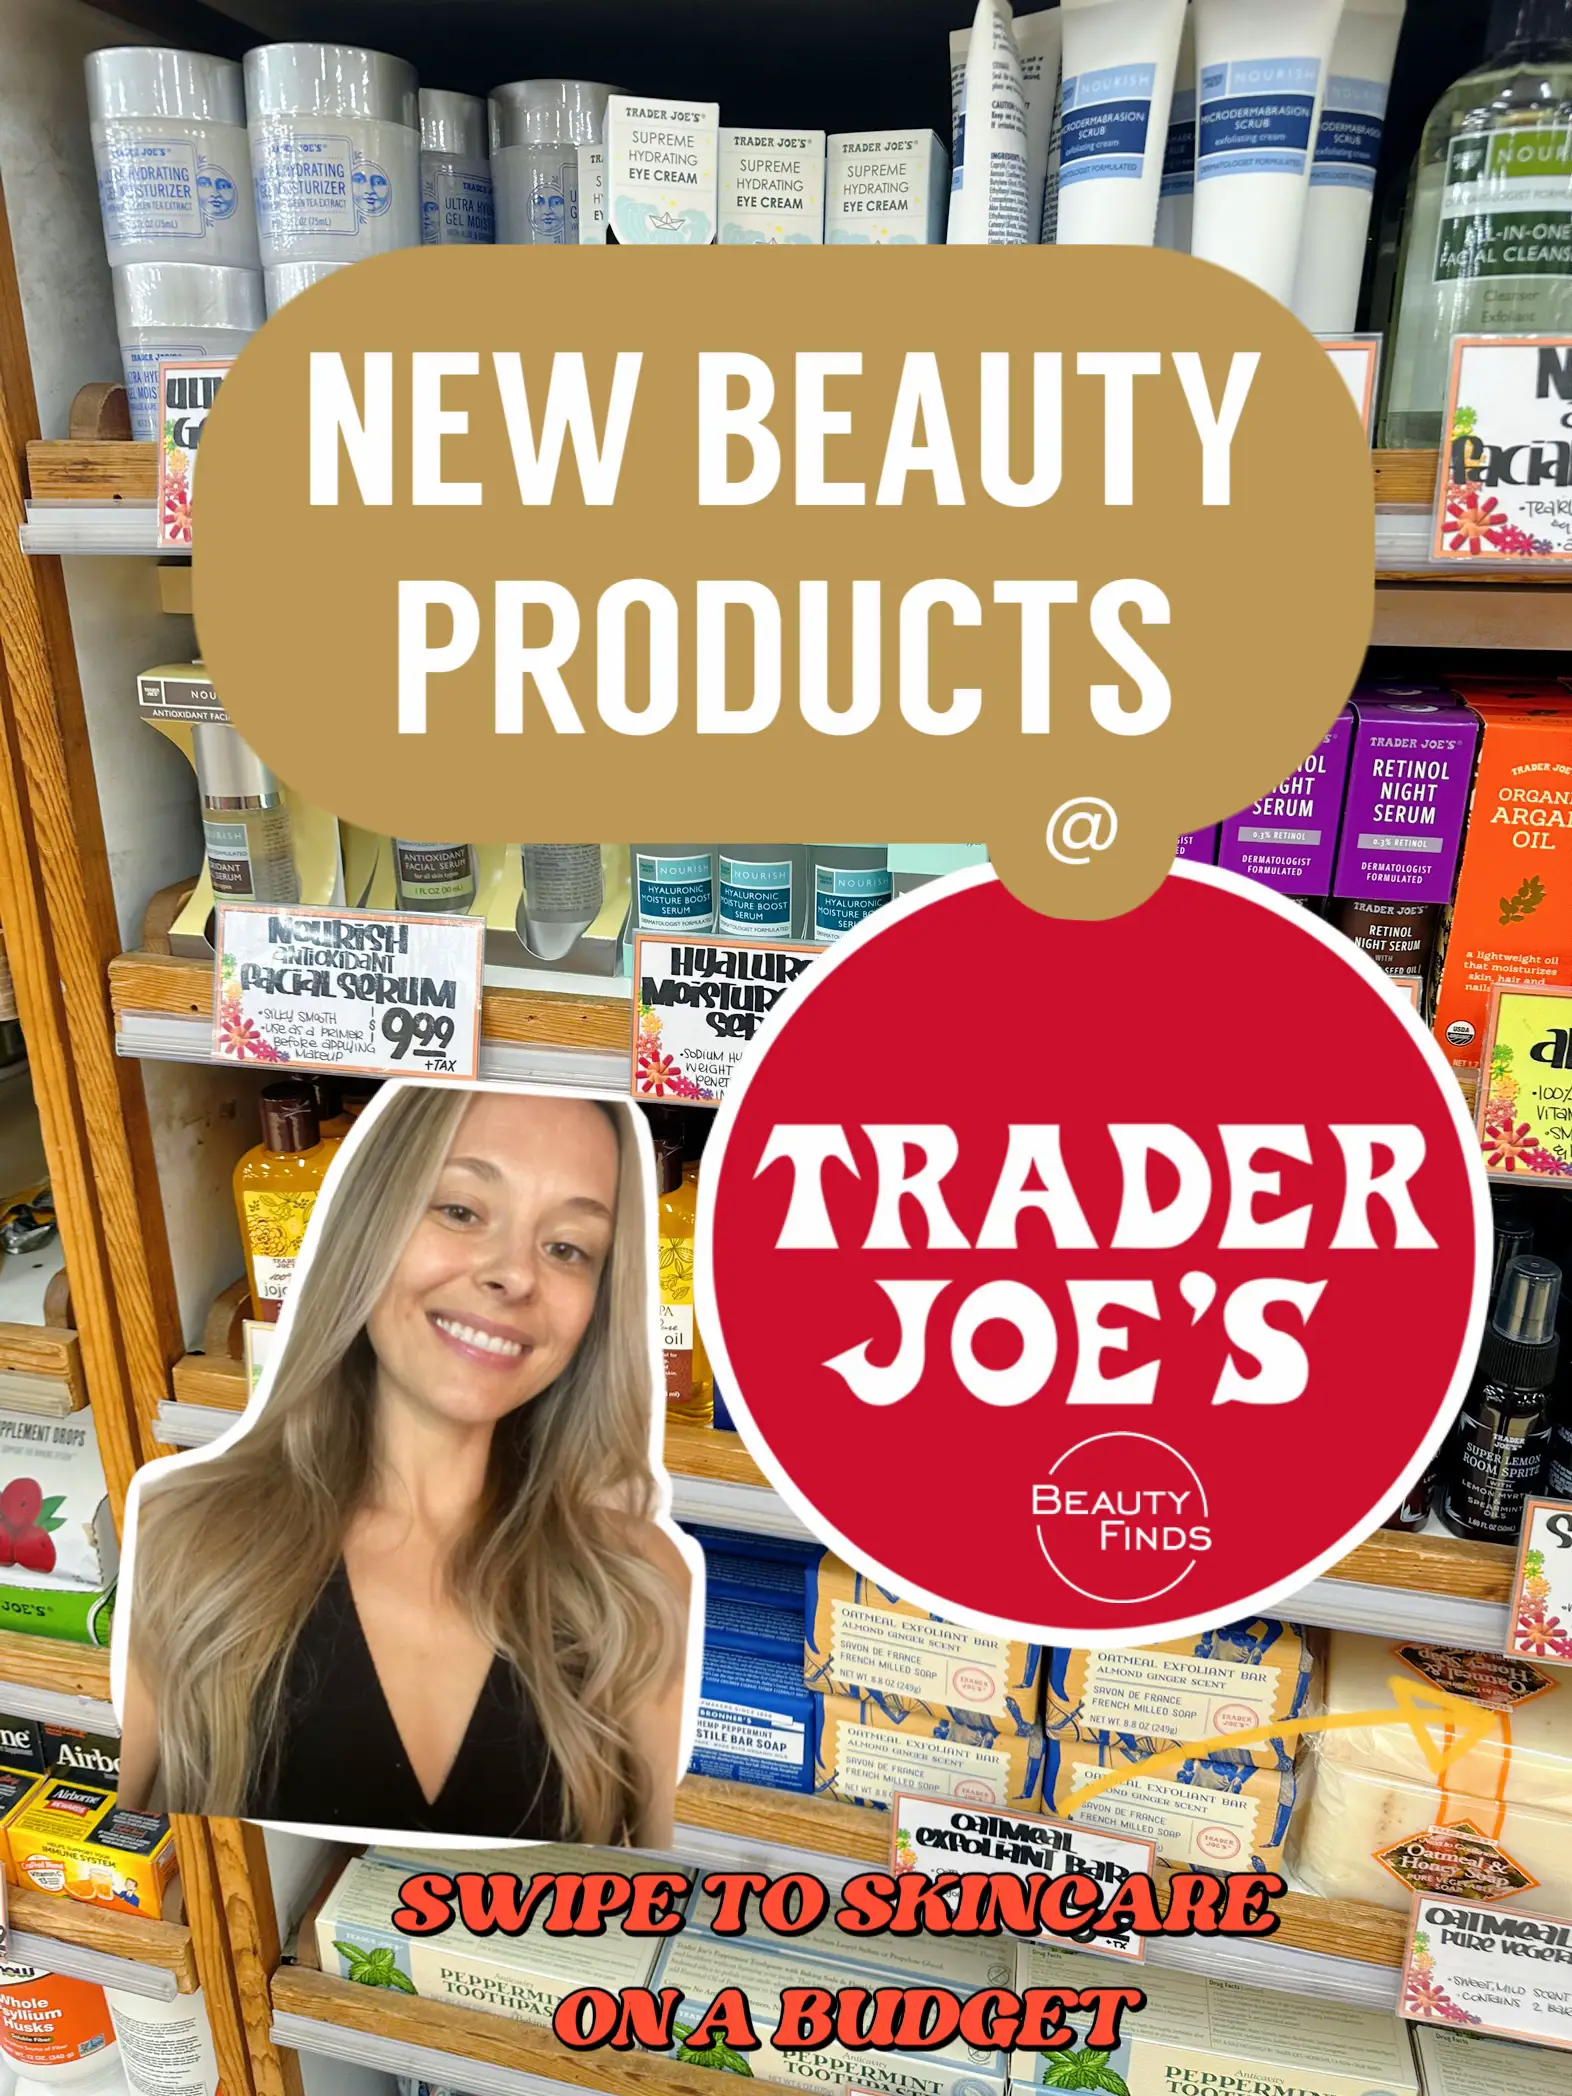 The perfect beauty dupes are hidden in plain sight at Trader Joe's